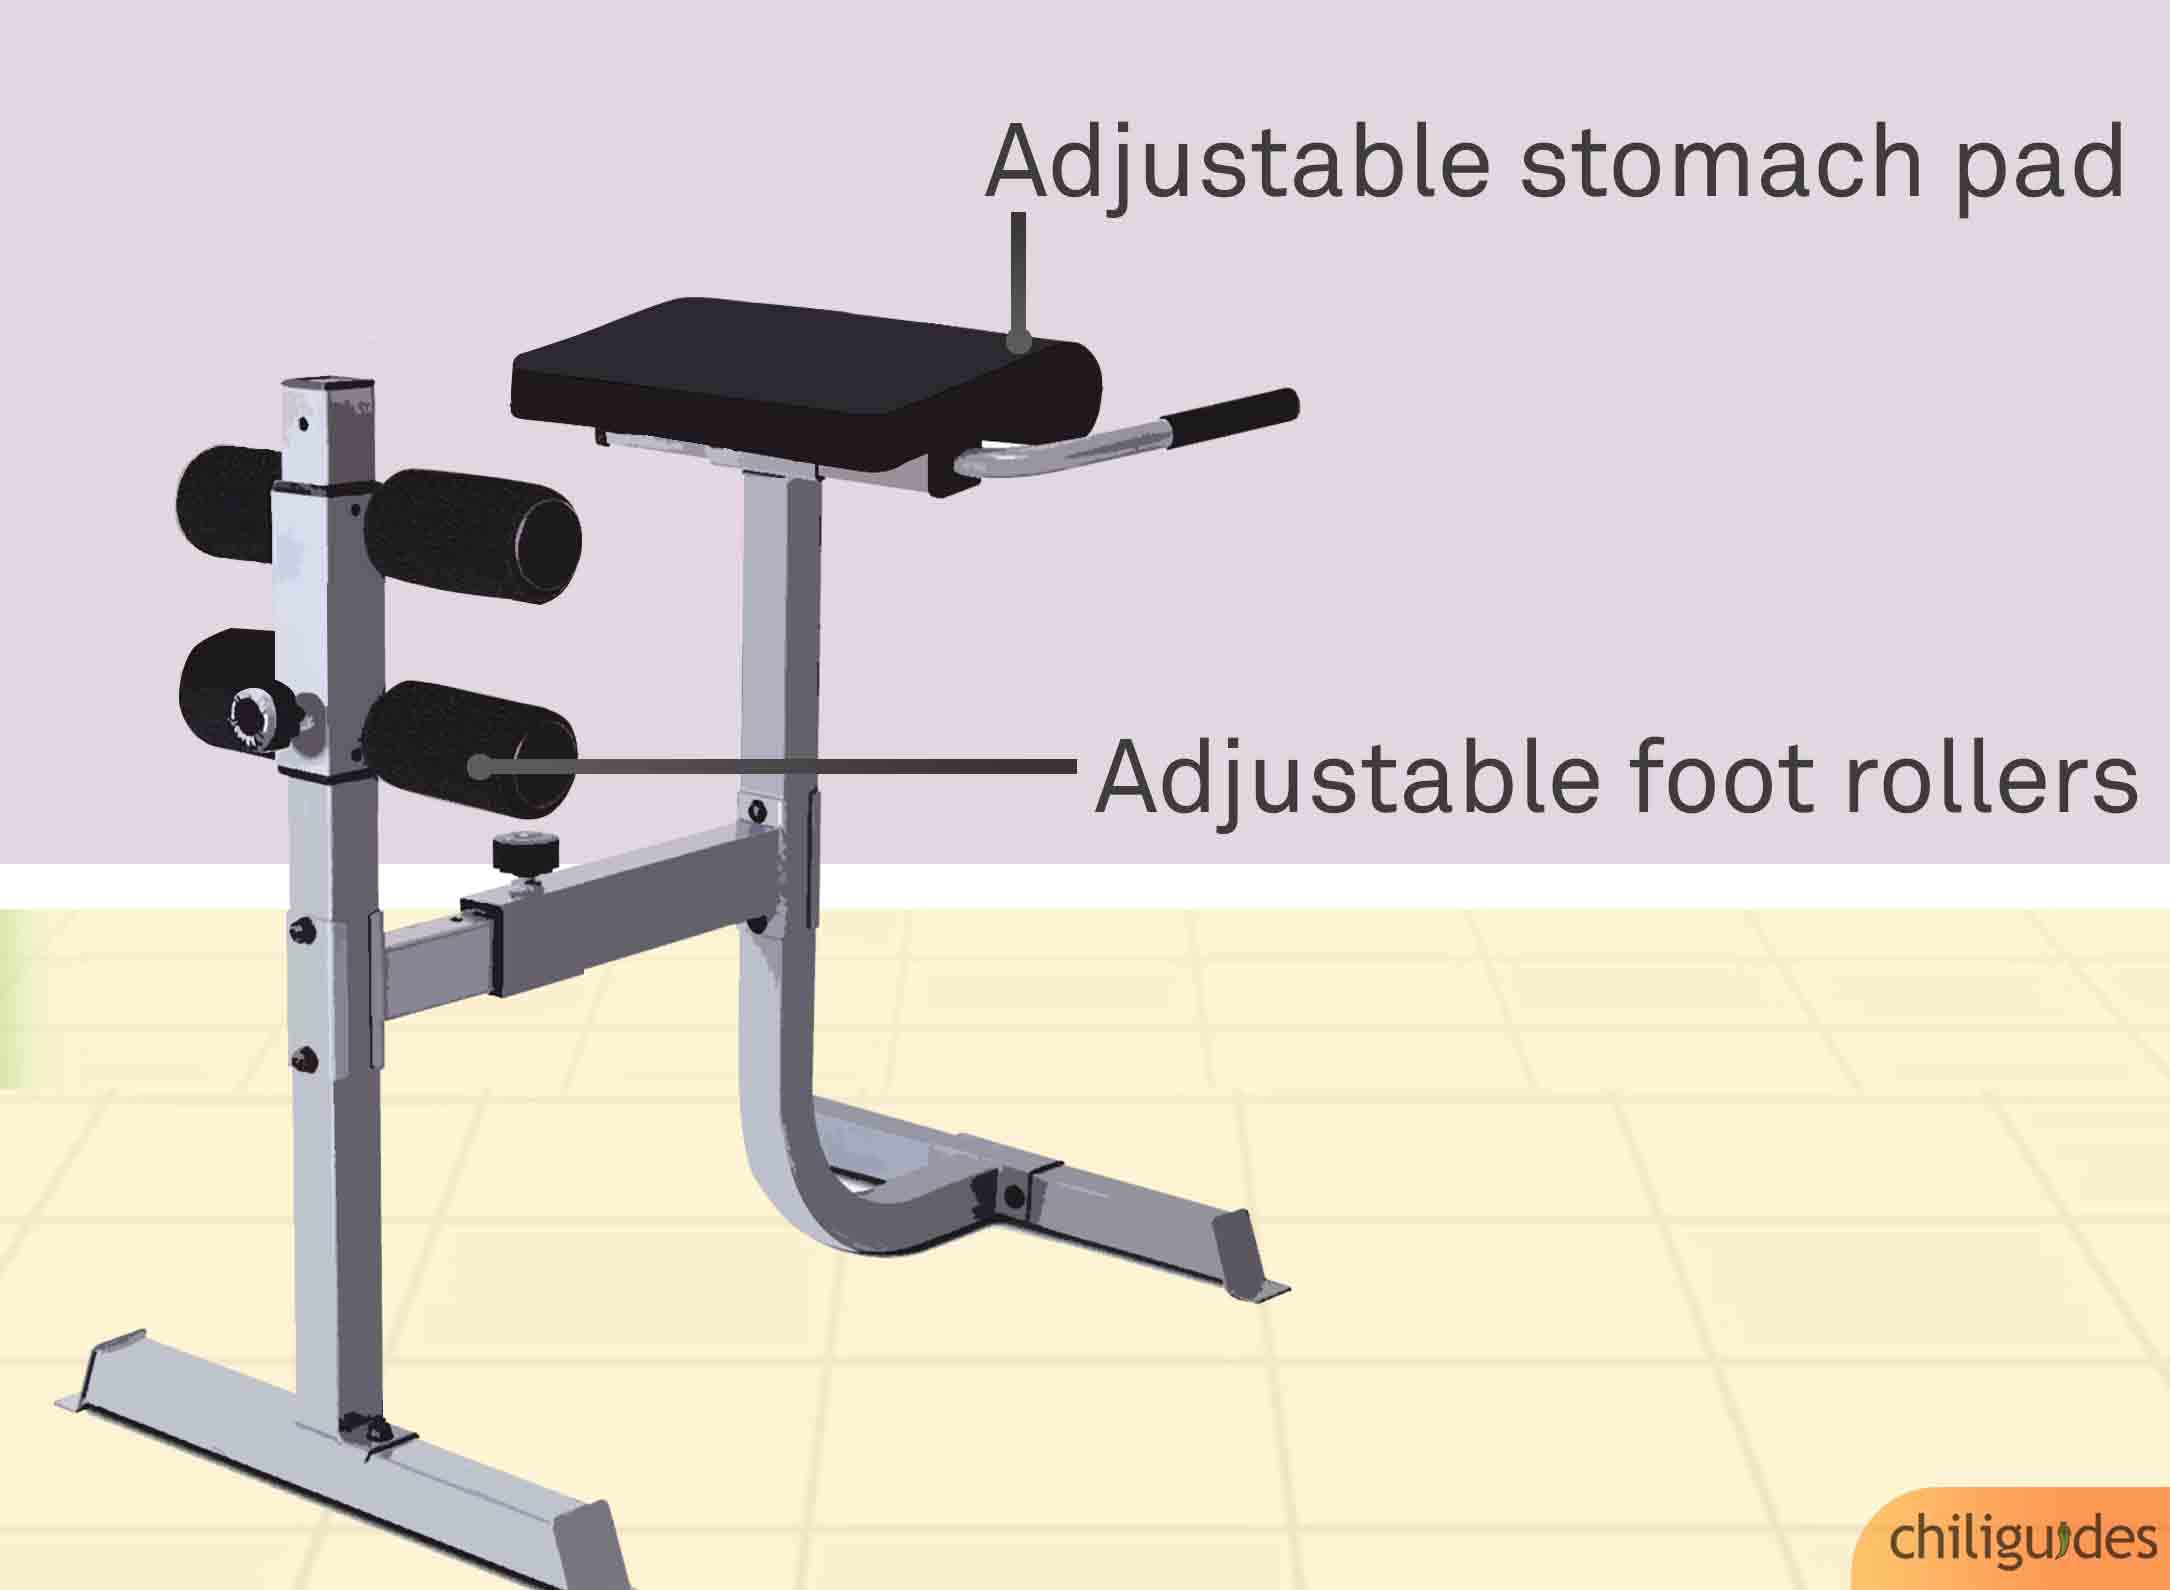 Look for an adjustable stomach pad or foot rollers.